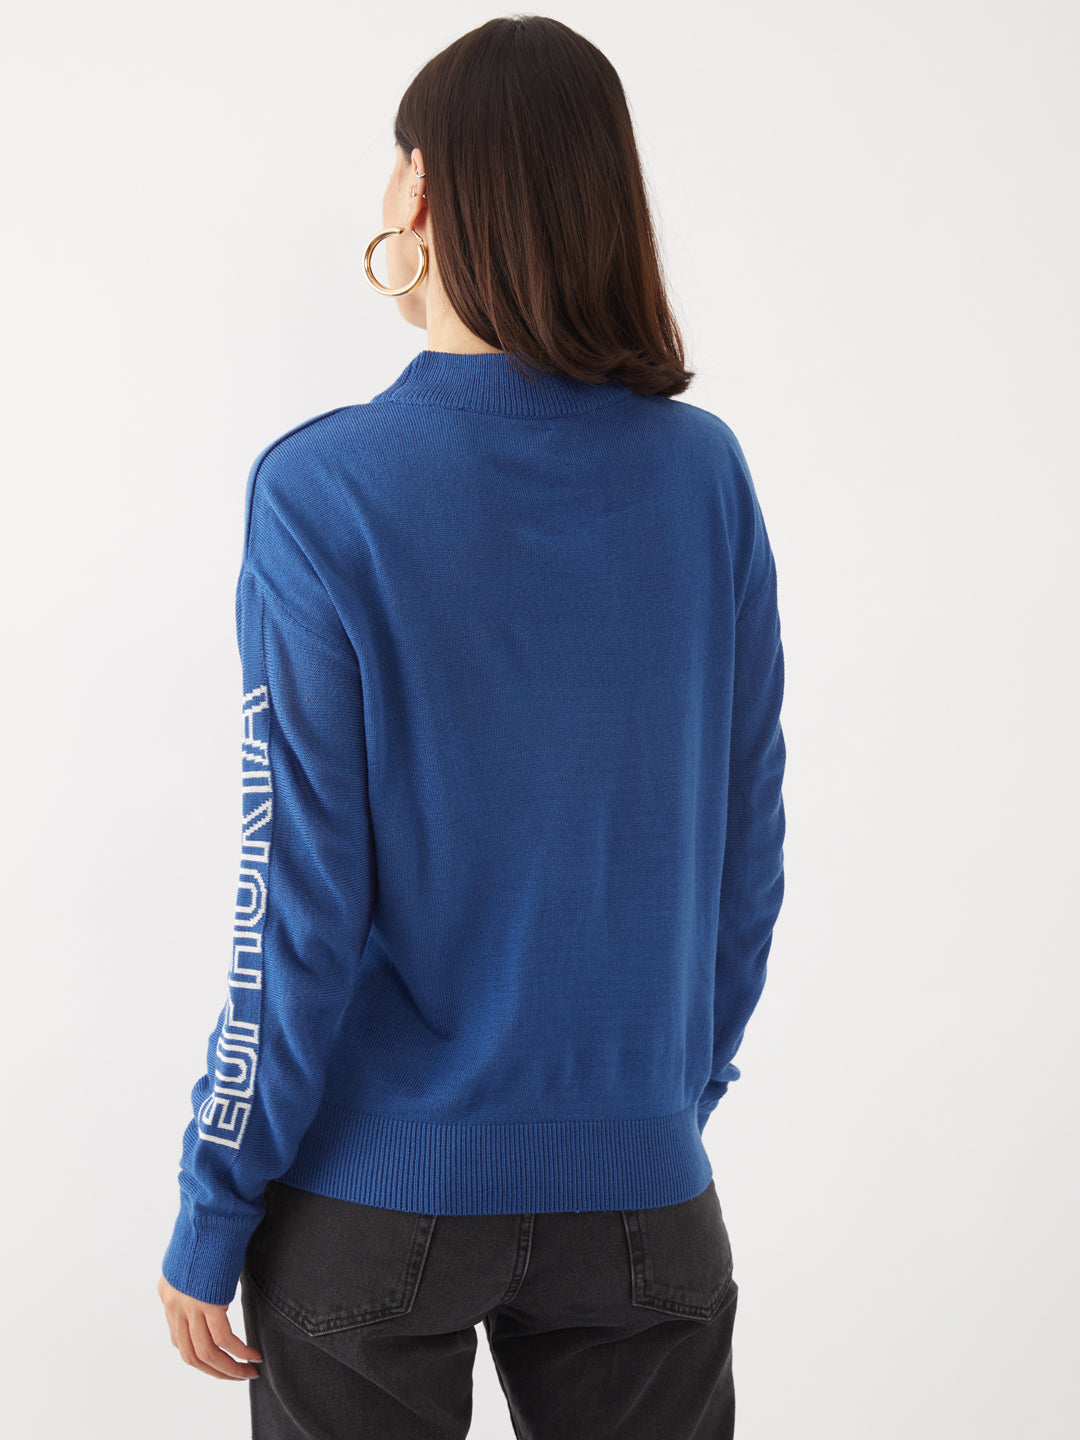 Blue Printed Sweater For Women